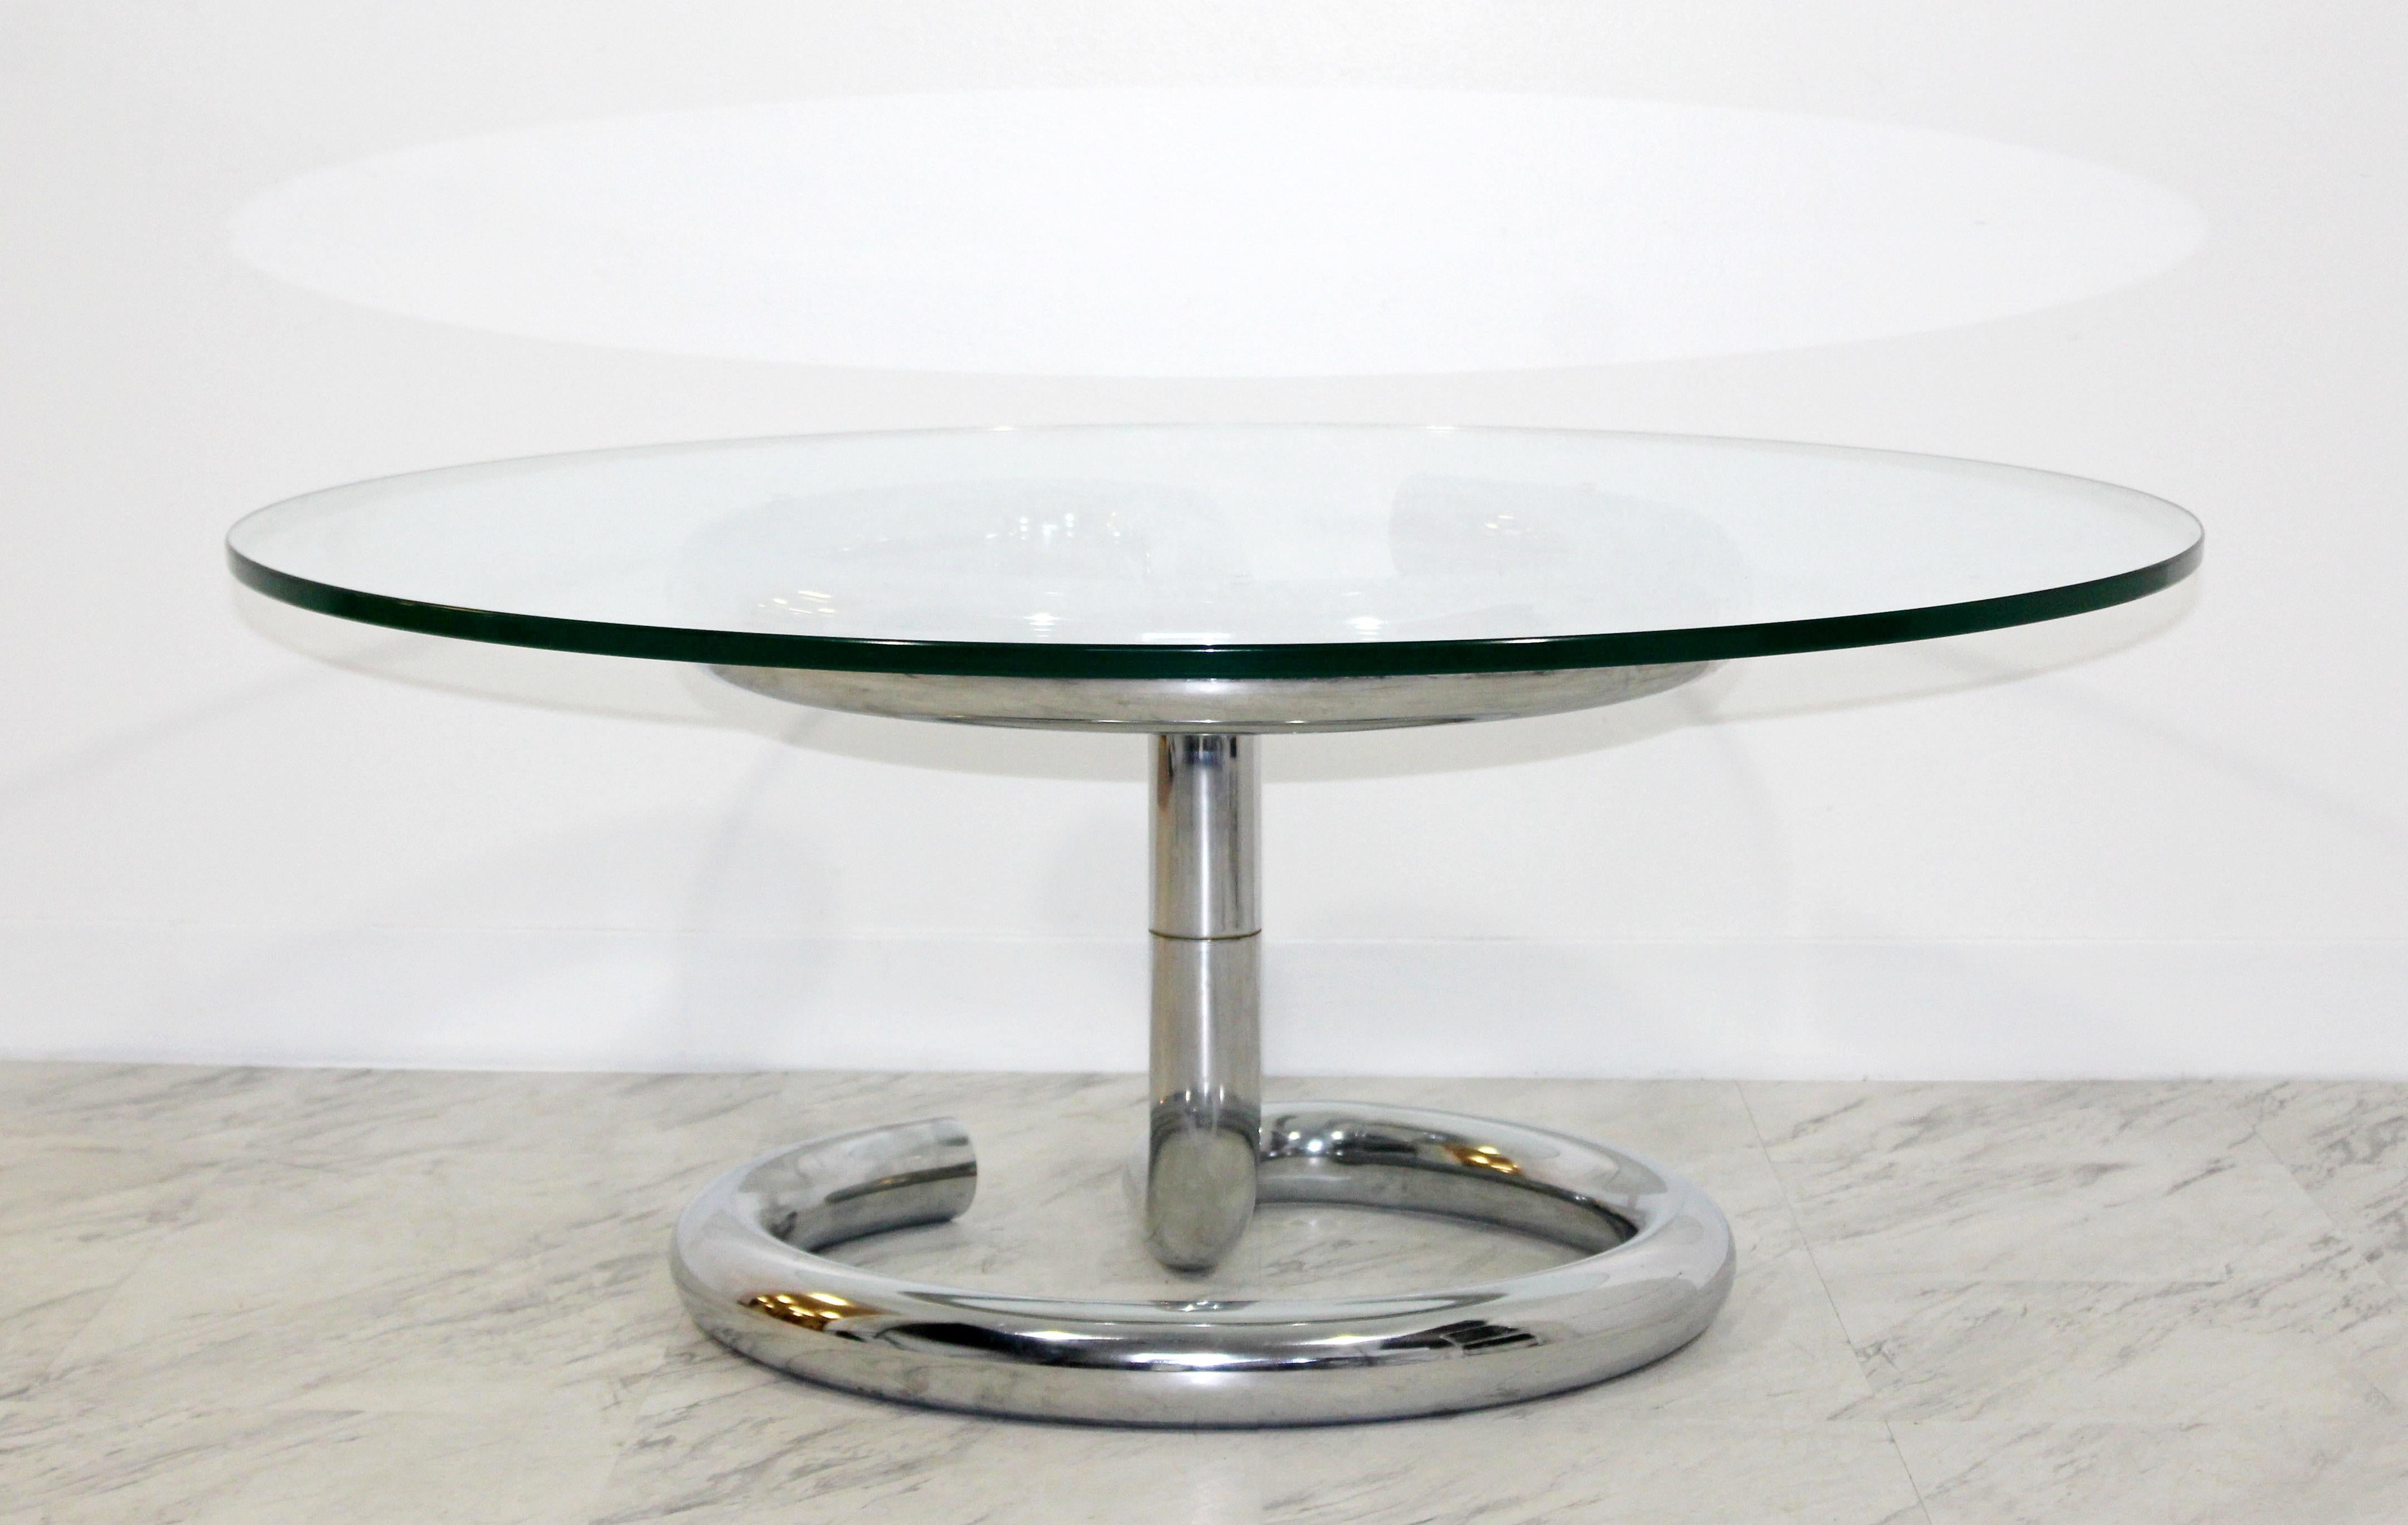 For your consideration is a magnificent coffee table, with an Anaconda chrome base and a circular glass top, by Paul Tuttle, circa the 1970s. In excellent condition. The dimensions are 40